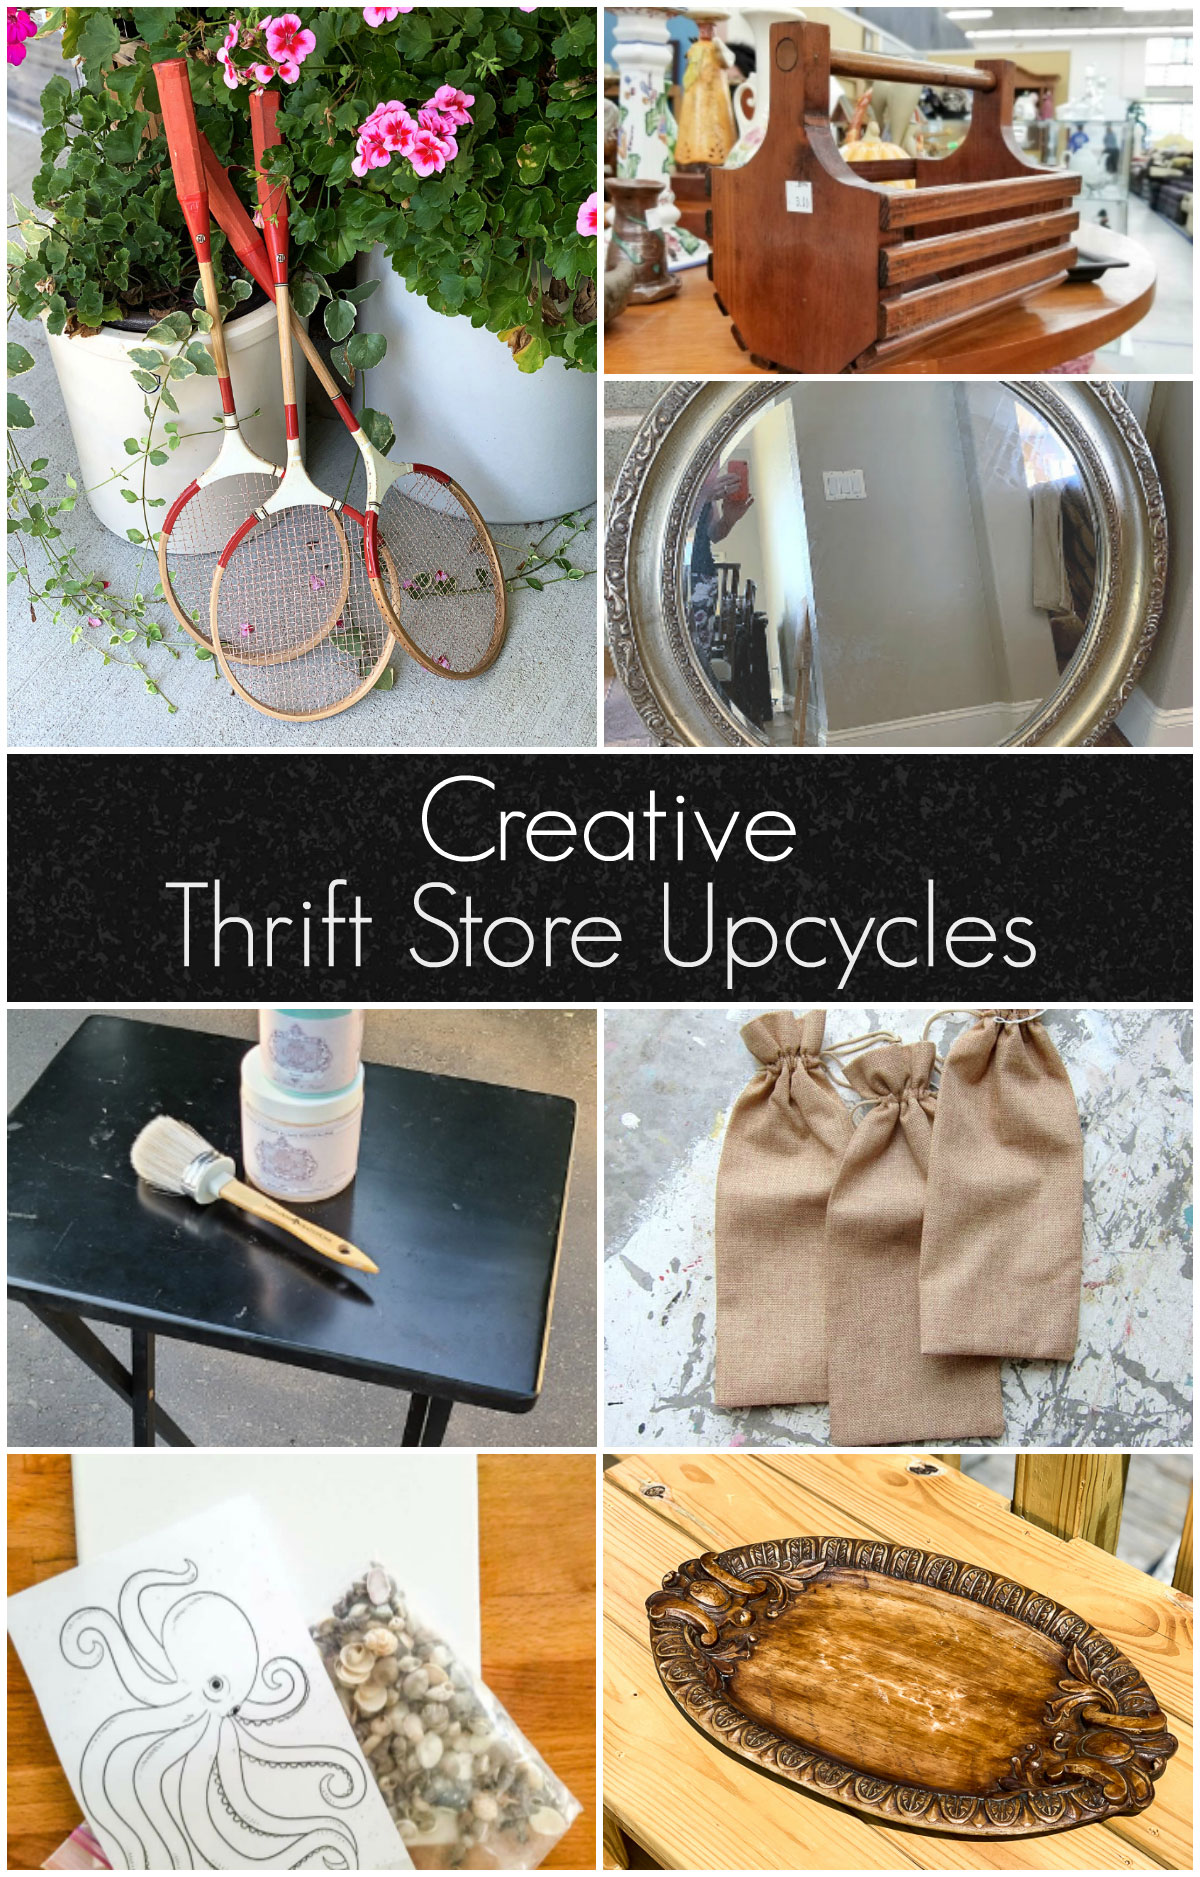 Creative thrift store upcycles